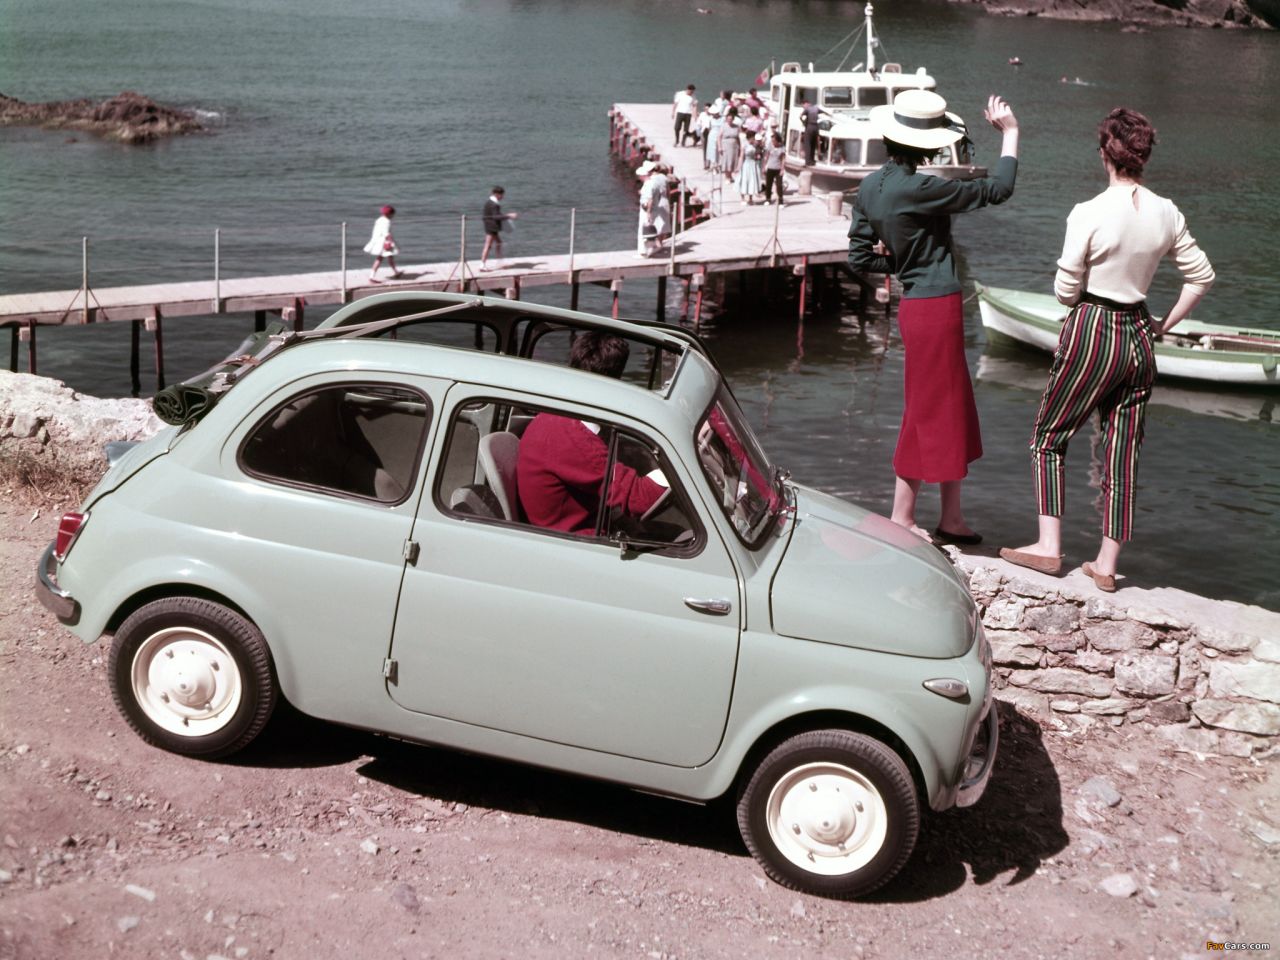 <em>Designed by Dante Giacosa, 1957 (to 1975)</em><br />Since the early 1900s Fiat has dominated the Italian car market. The Fiat 500 is interesting as it was deliberately designed as a reasonably priced car -- an answer to Volkswagen's Beetle. The accessible, egalitarian design resulted in a huge cross section of Italian society driving a Fiat 500. 